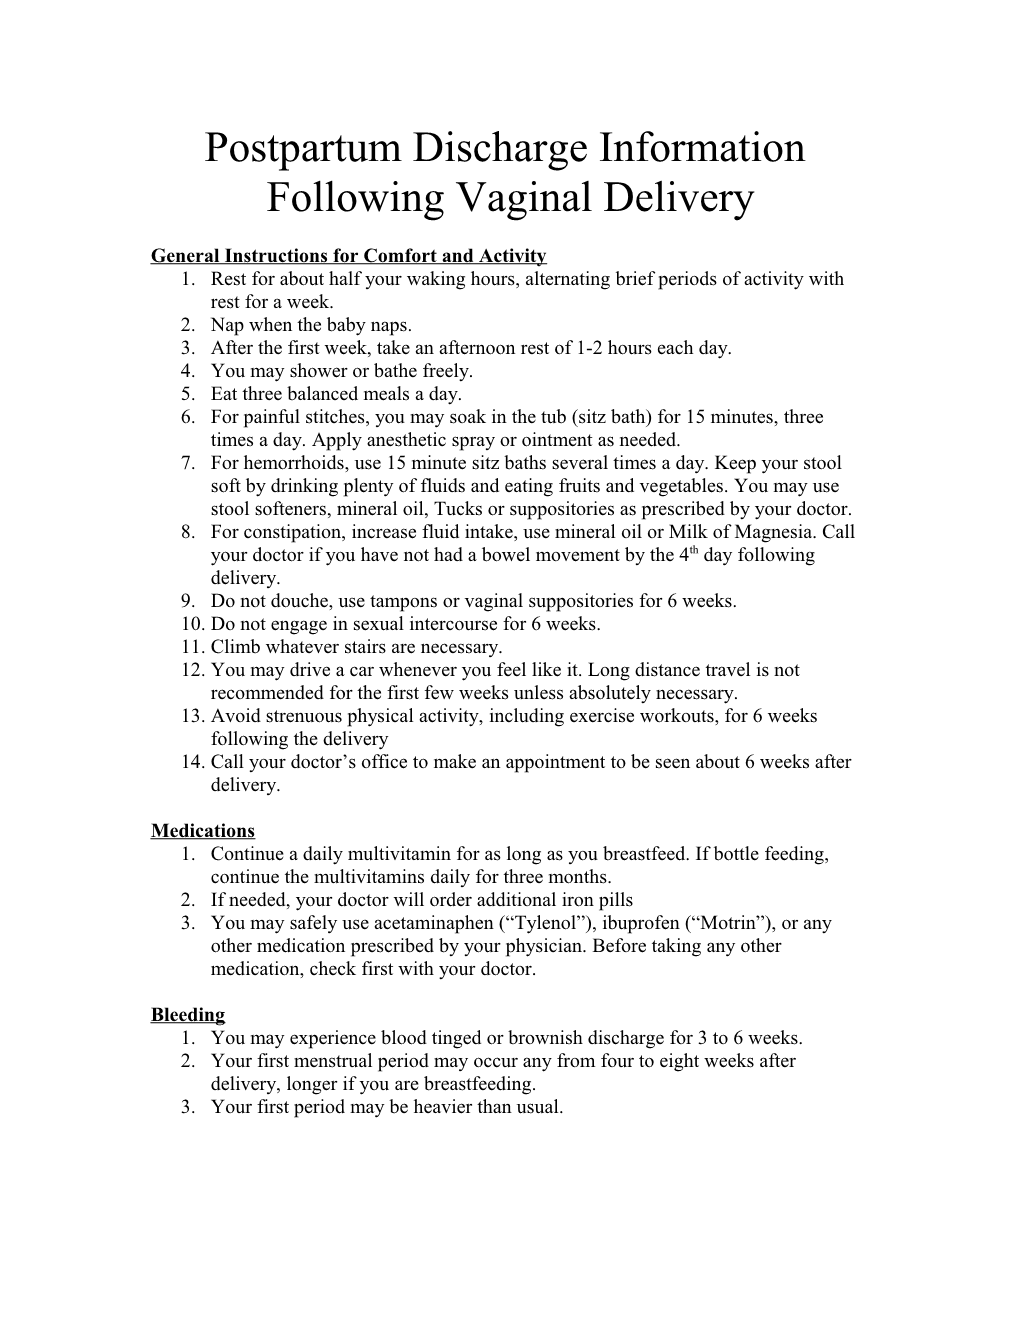 Postpartum Discharge Information Following Vaginal Delivery